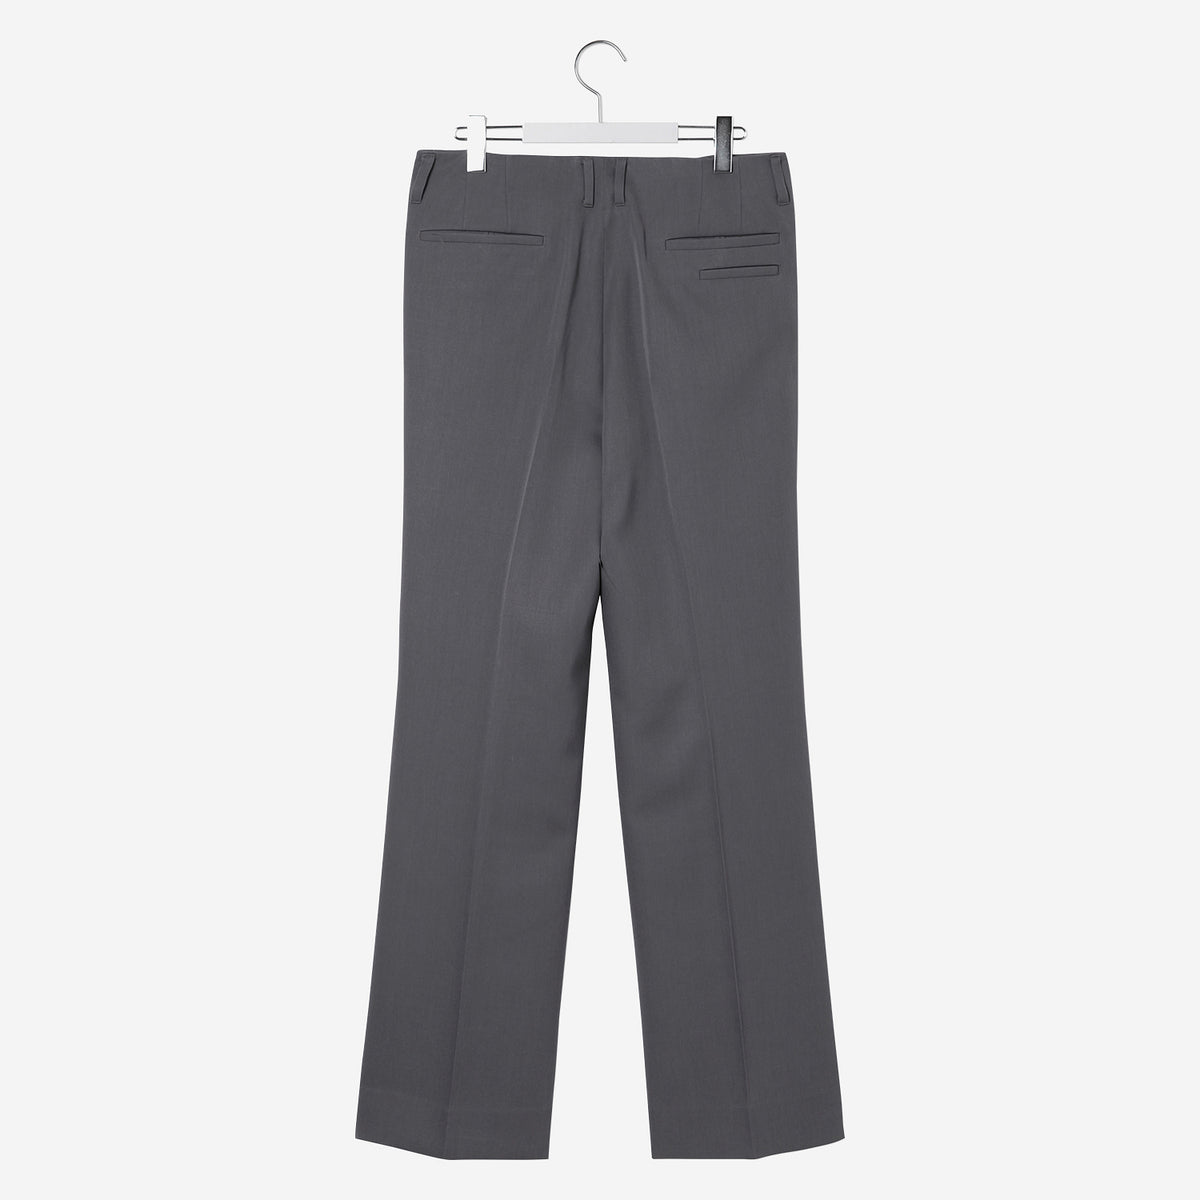 QUINN / Wide Tailored Pants / gray – th products